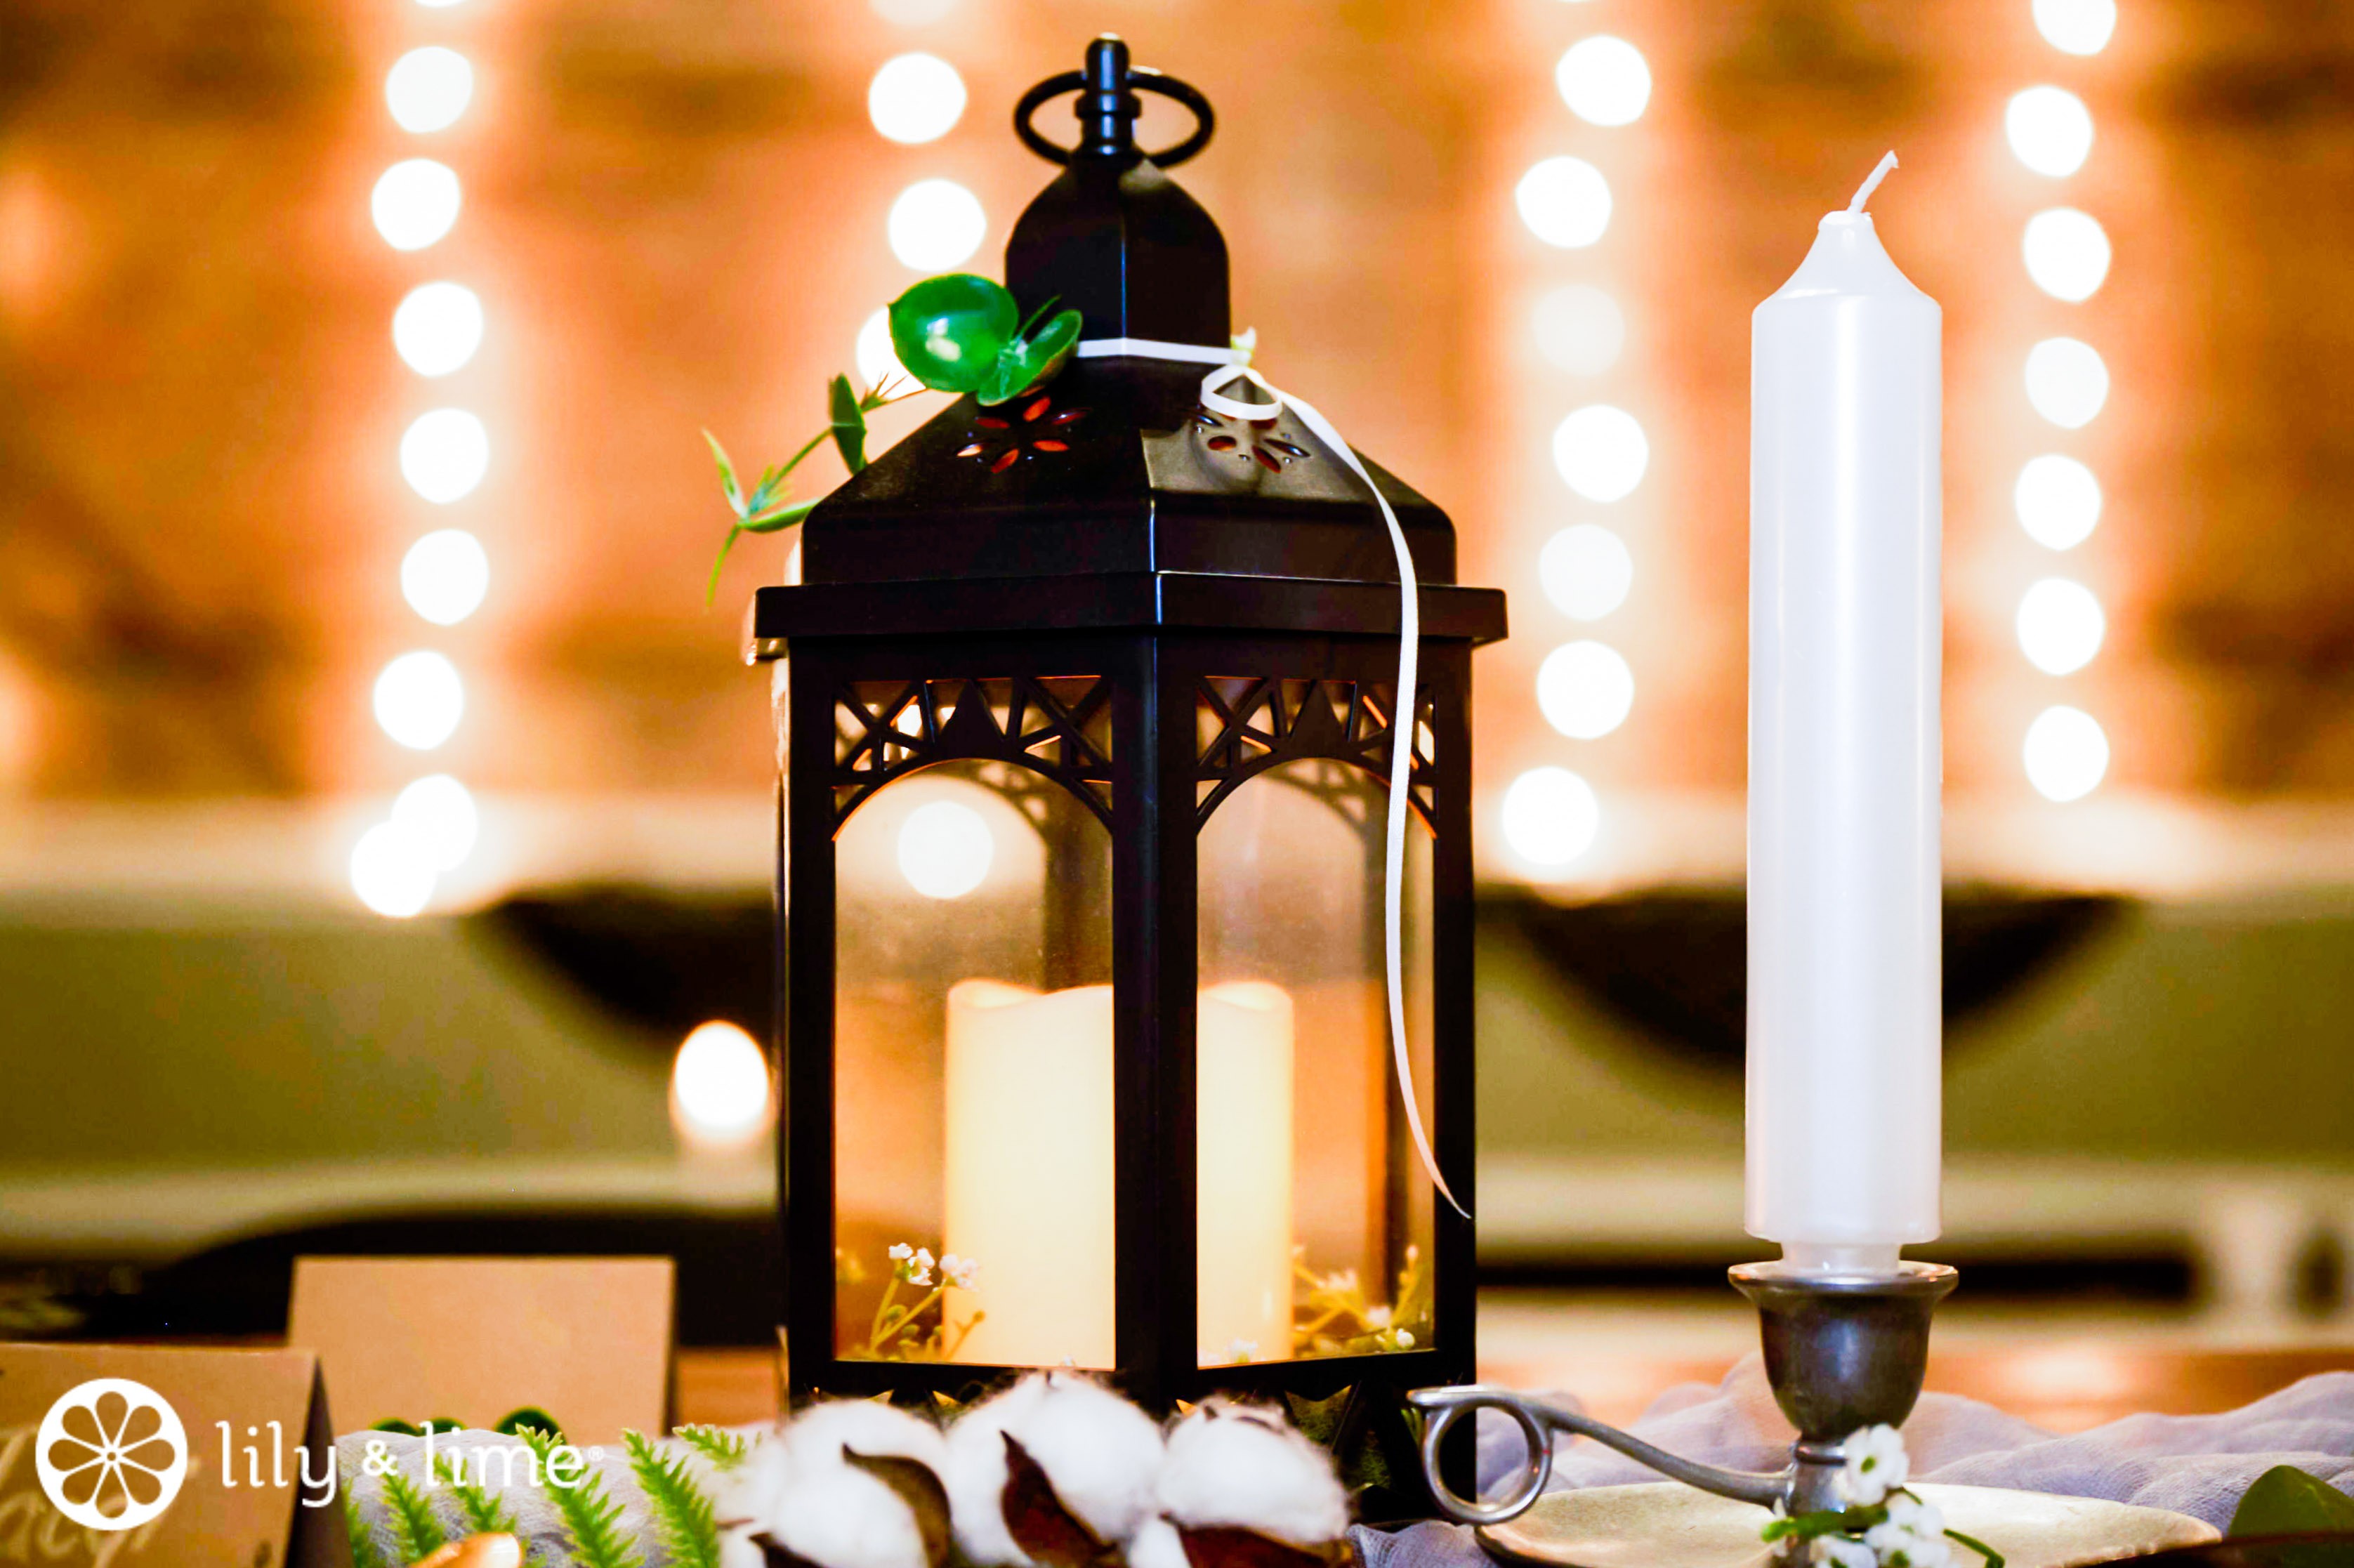 Reception table setting details - Black tablecloth, white candles, black  birdcage with white and green floral arrangement